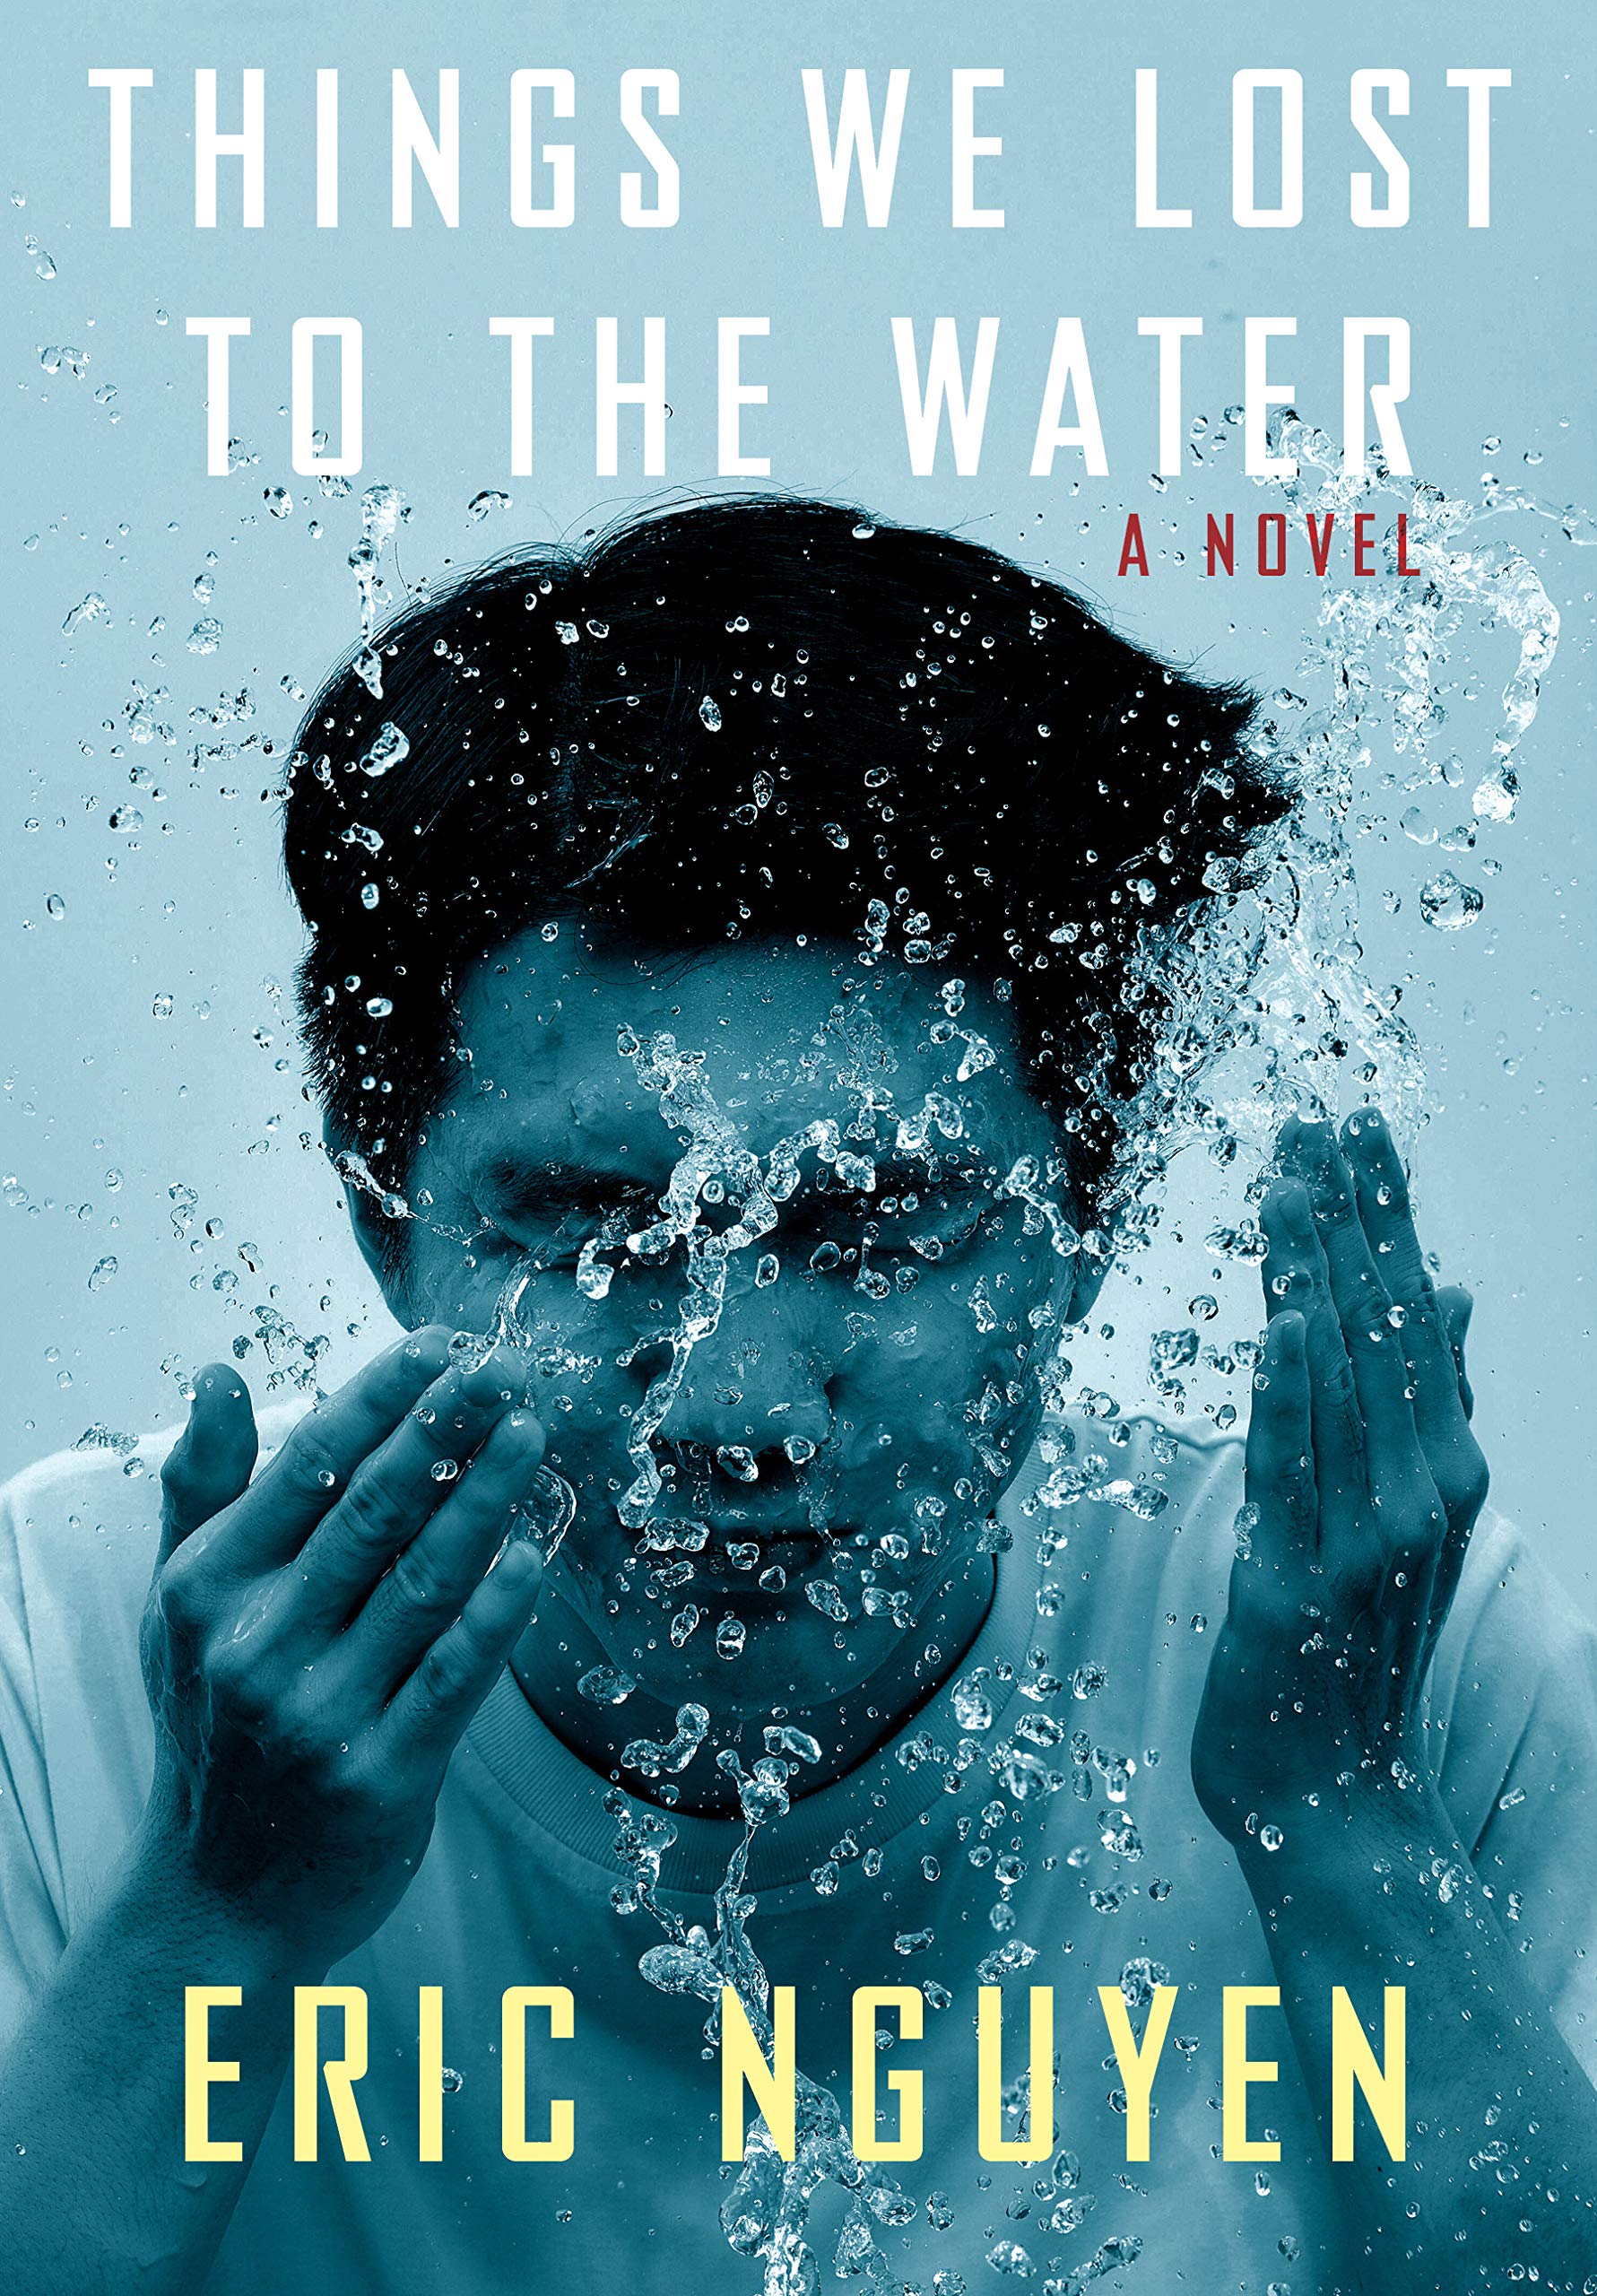 Things We Lost to the Water: A novel Hardcover by Eric Nguyen